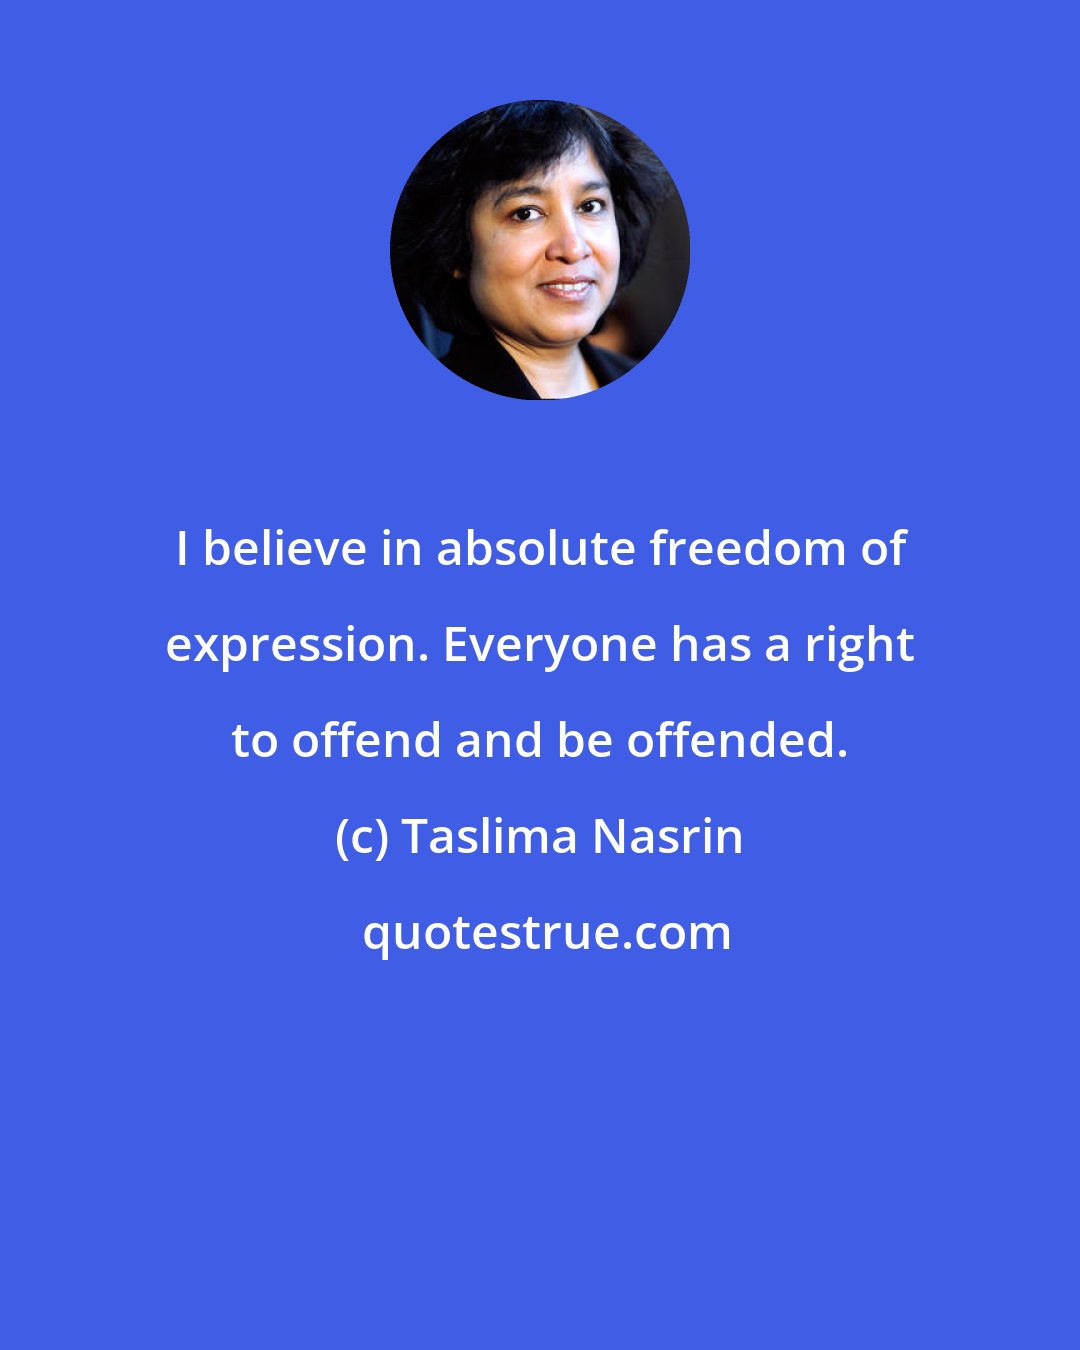 Taslima Nasrin: I believe in absolute freedom of expression. Everyone has a right to offend and be offended.